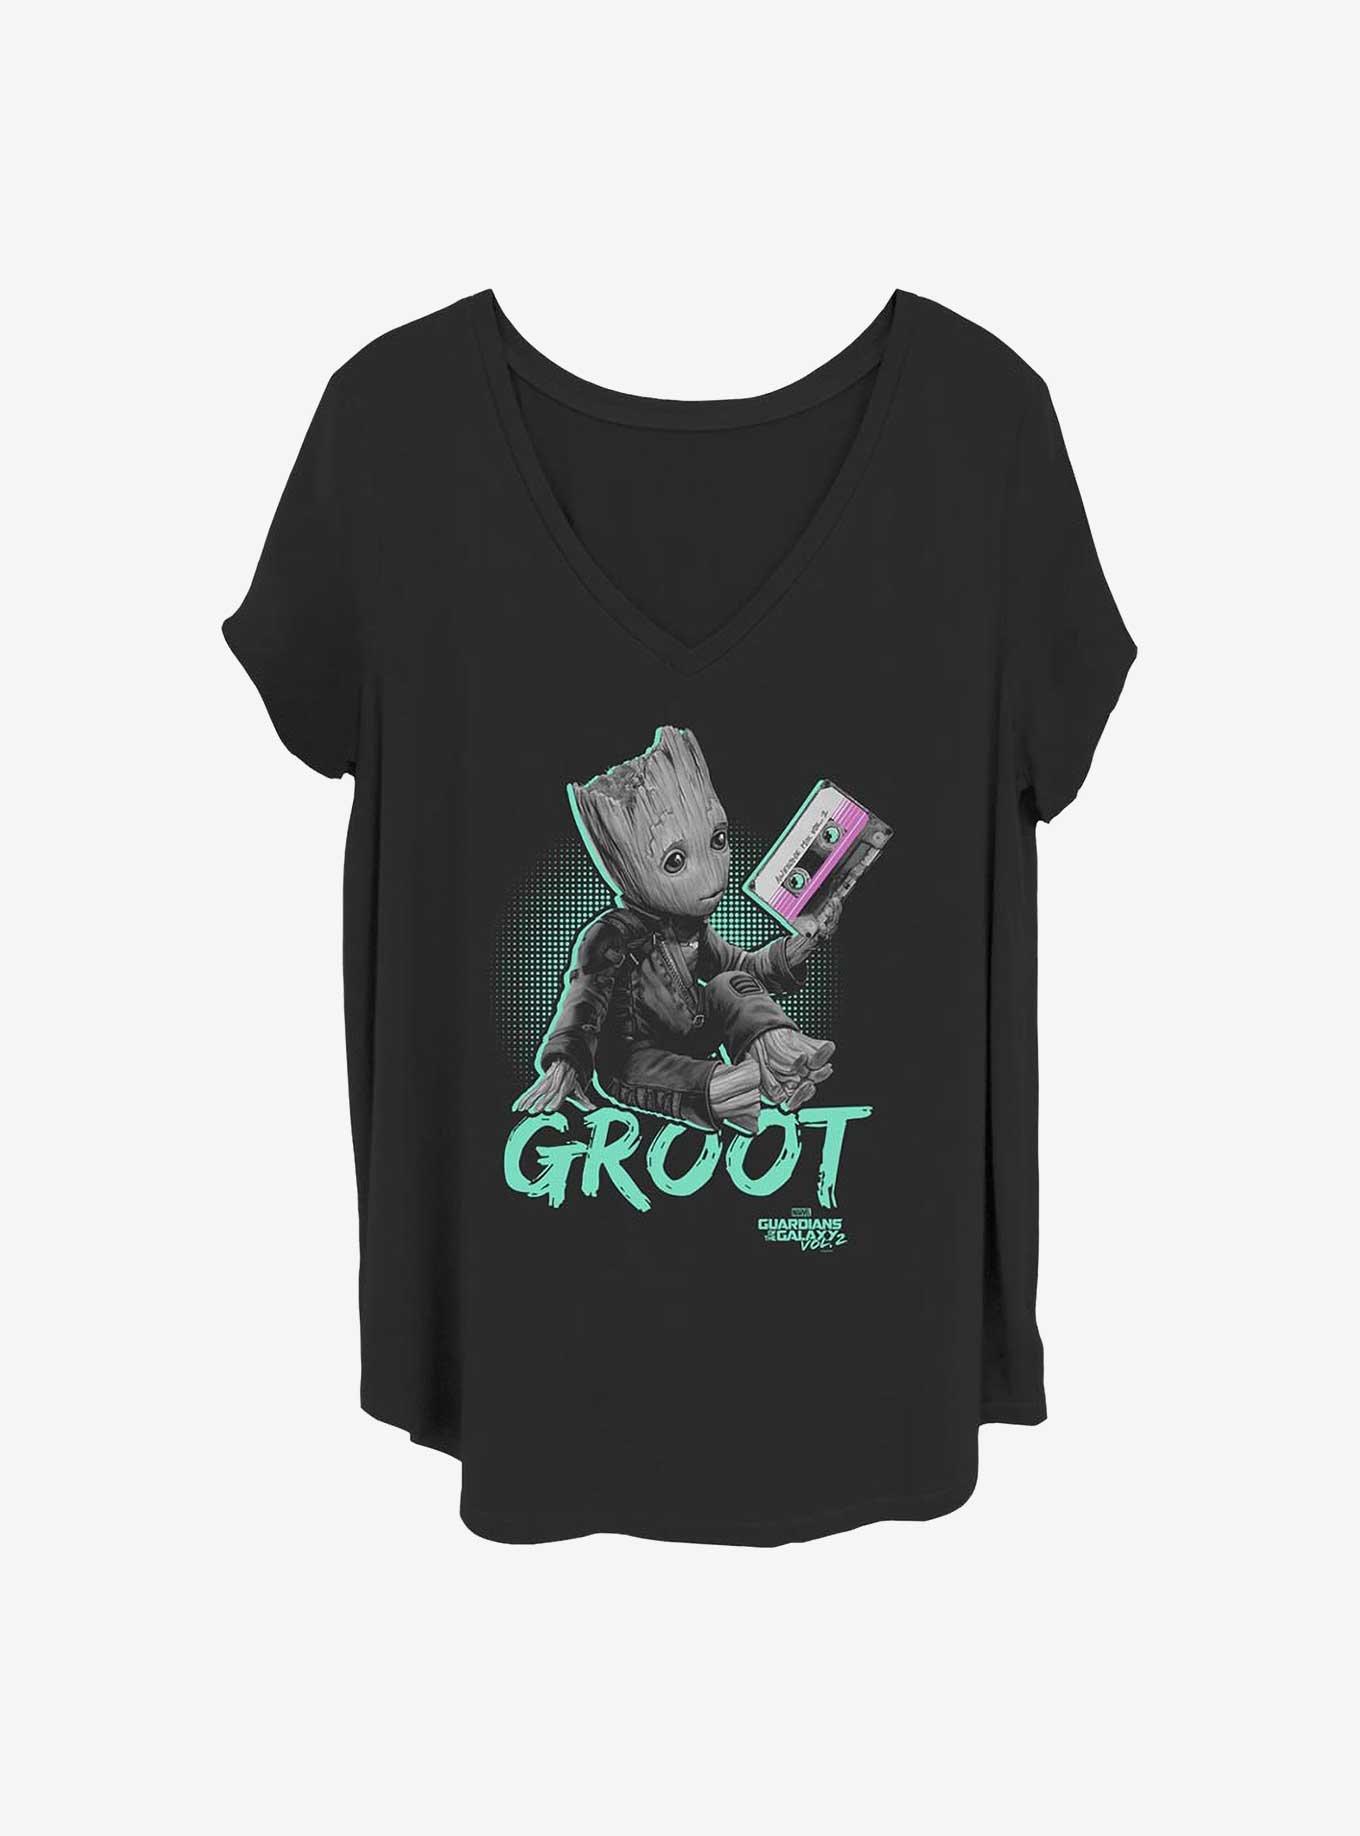 Marvel Guardians of the Galaxy Neon Baby Groot Girls T-Shirt Plus Size, BLACK, hi-res